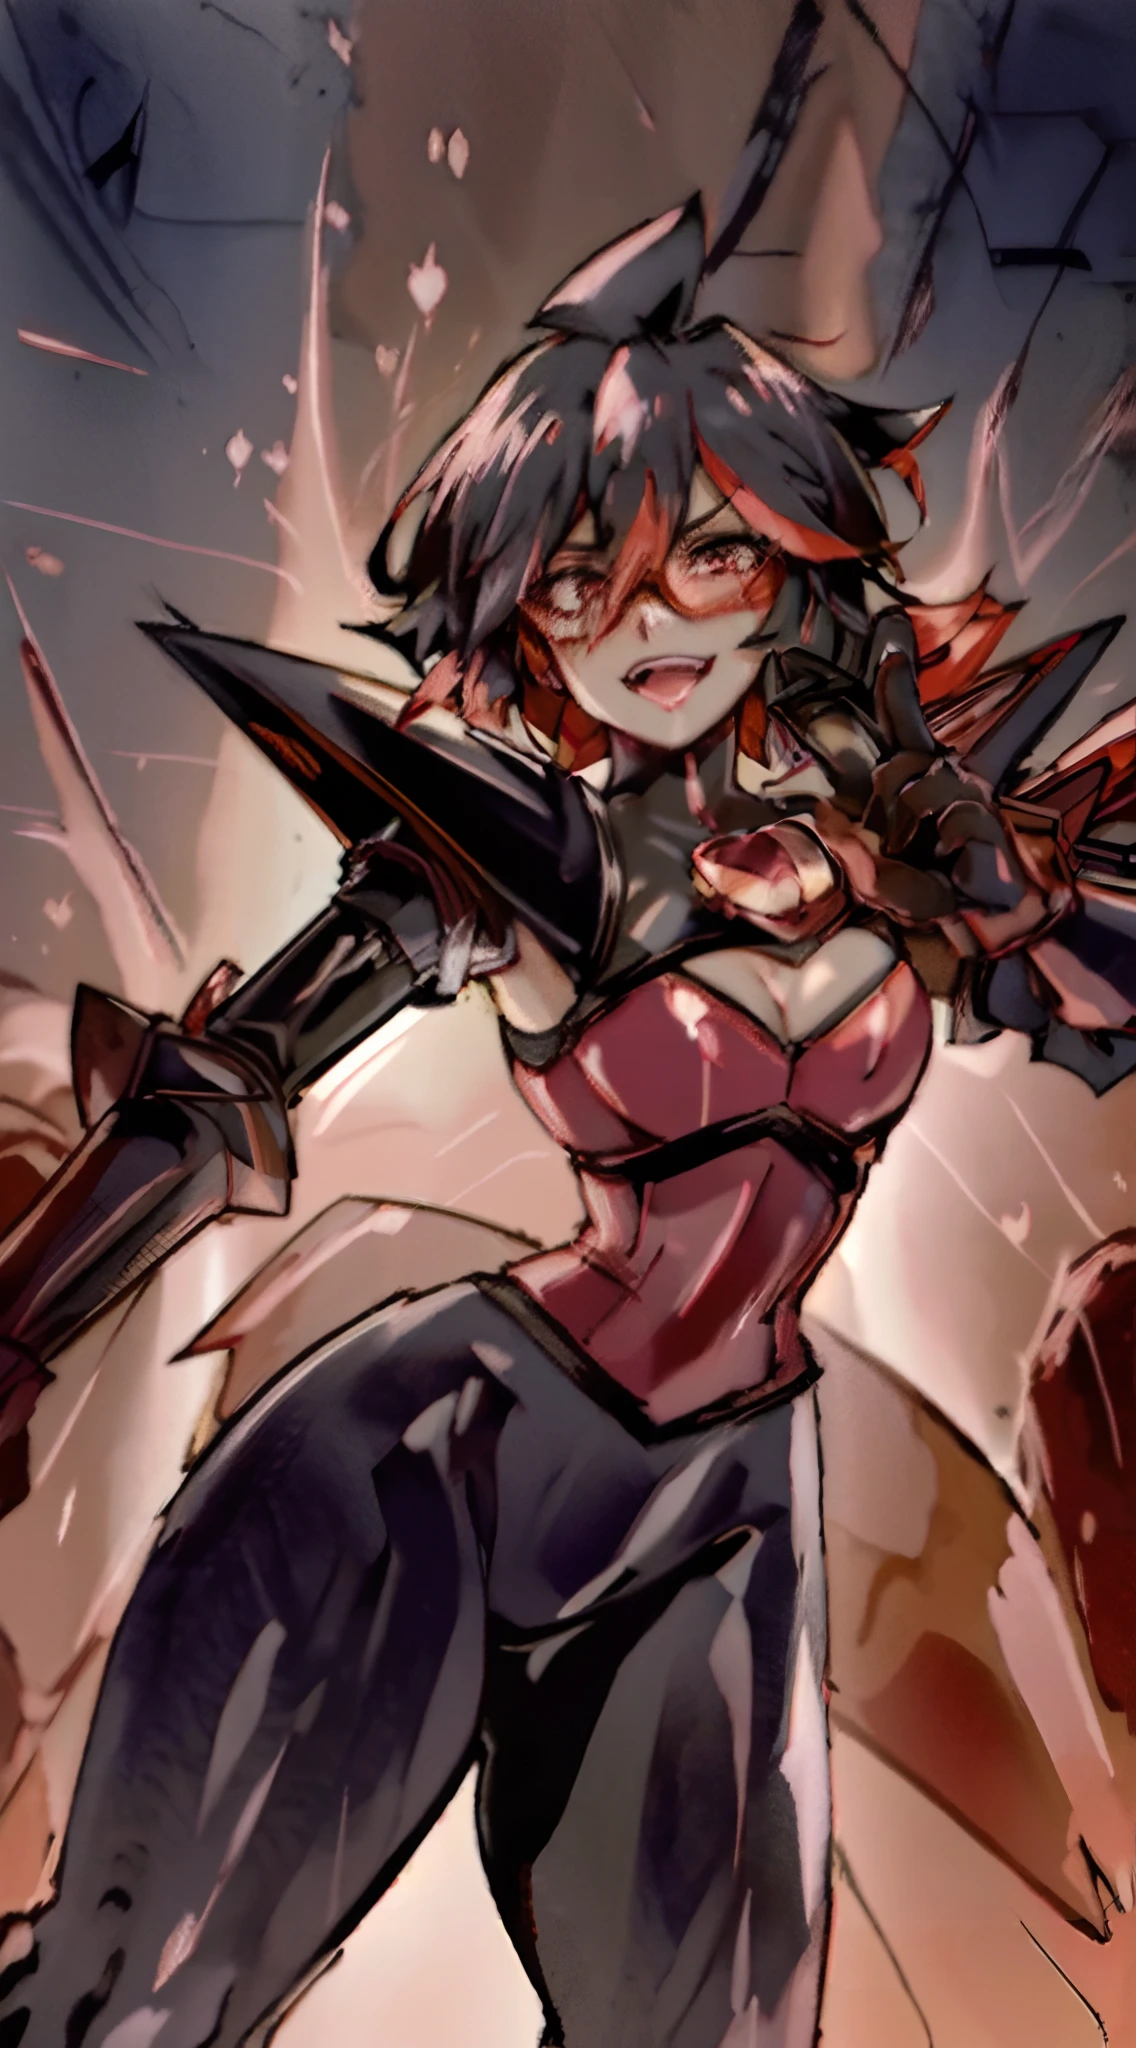 (Best quality, 4k, 8k, Ultra HD, high resolution, masterpiece:1.2), Ryuko Matoi as Mettaton, full spandex/latex attire (reds and blacks), neon lights, flawless makeup, happy singing pose, fierce expression, long hair, simple greyscale background, sleek design, captivating stage presence, captivating red lipstick, confident stance, fashion model, anime glasses, anime tinted red shades, black latex pants, black latex corset, holding a large stage microphone, performance microphone, black microphone, singing stance, extremely tight corset, red bow tie around neck, medium nougat-skin color, heart-shaped silver belt buckle, thick armored metal belt, heart on armored red chestplate, bobcut hair, dark brown hair, heavily armored black cuirass, chest encased in armor, black turtleneck armored, wide hips, black hair, thick flowing dark brown hair,black undersuit,